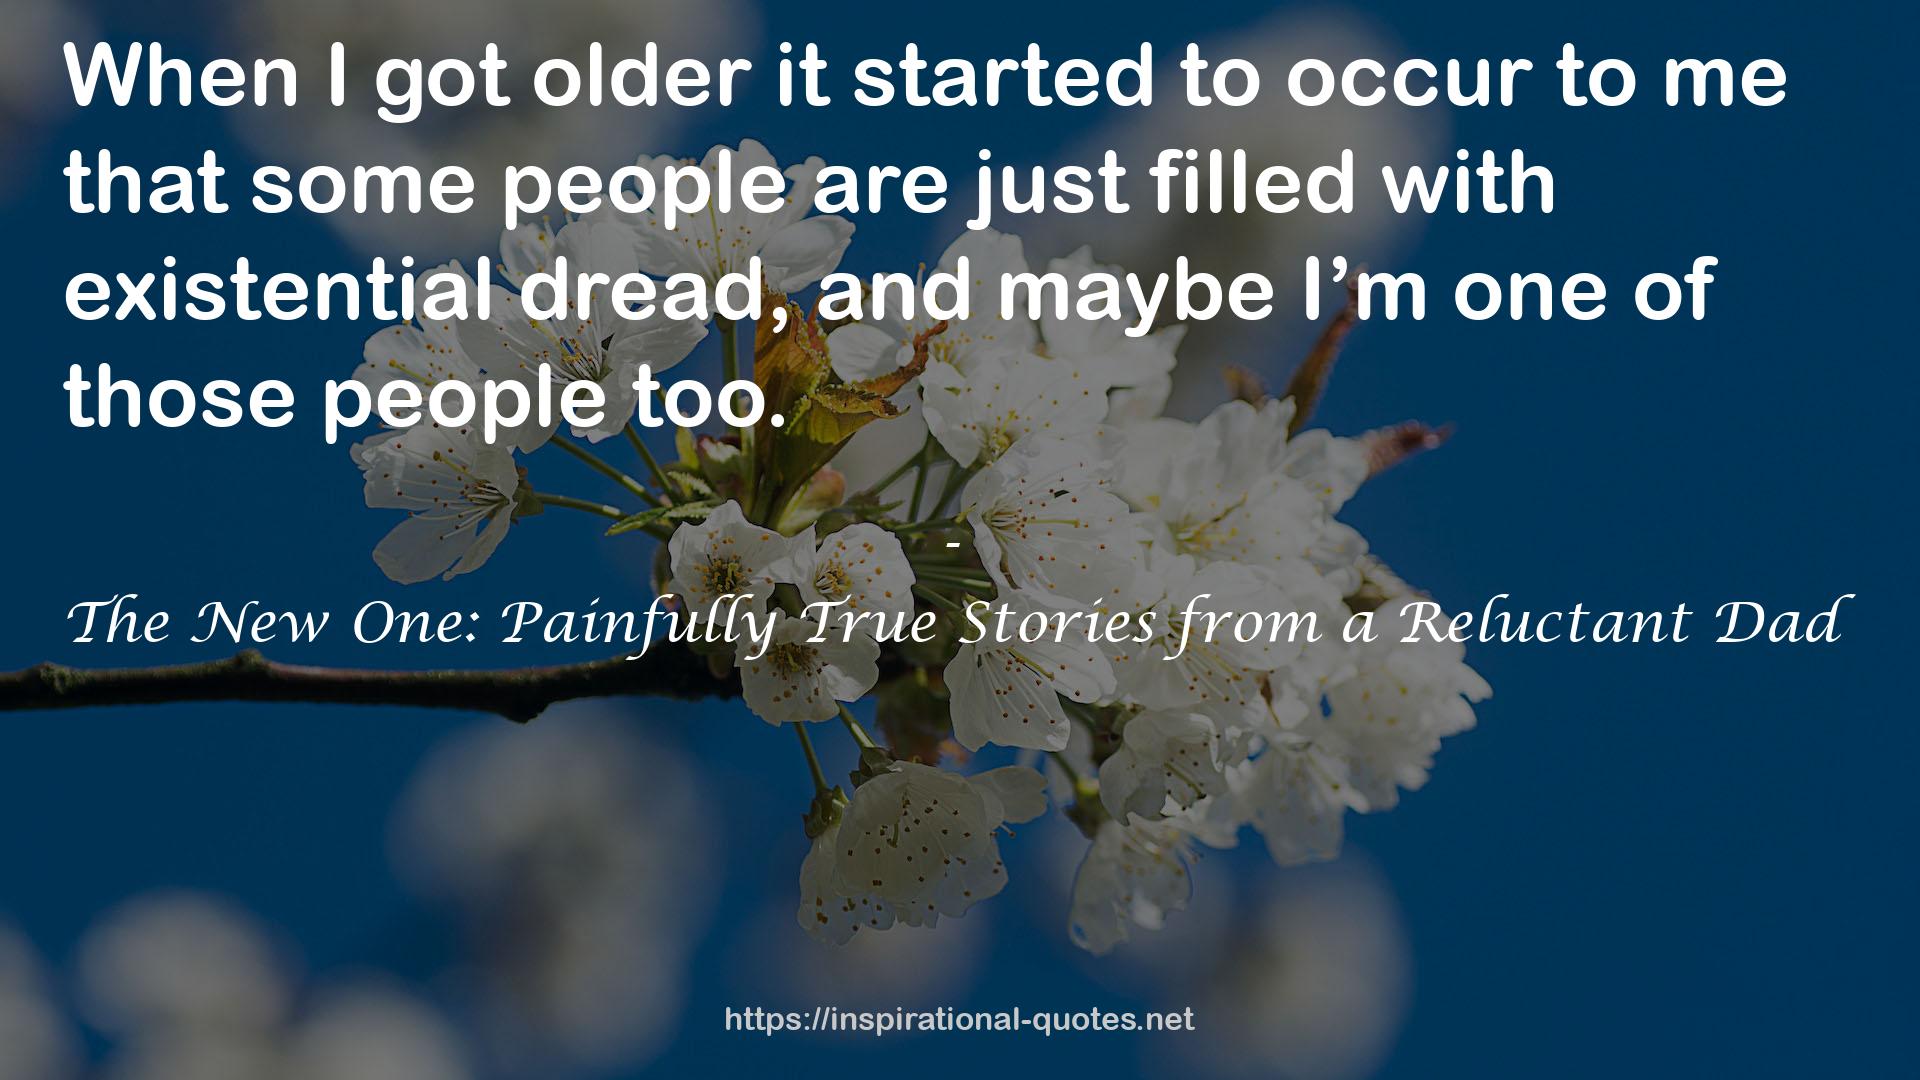 The New One: Painfully True Stories from a Reluctant Dad QUOTES